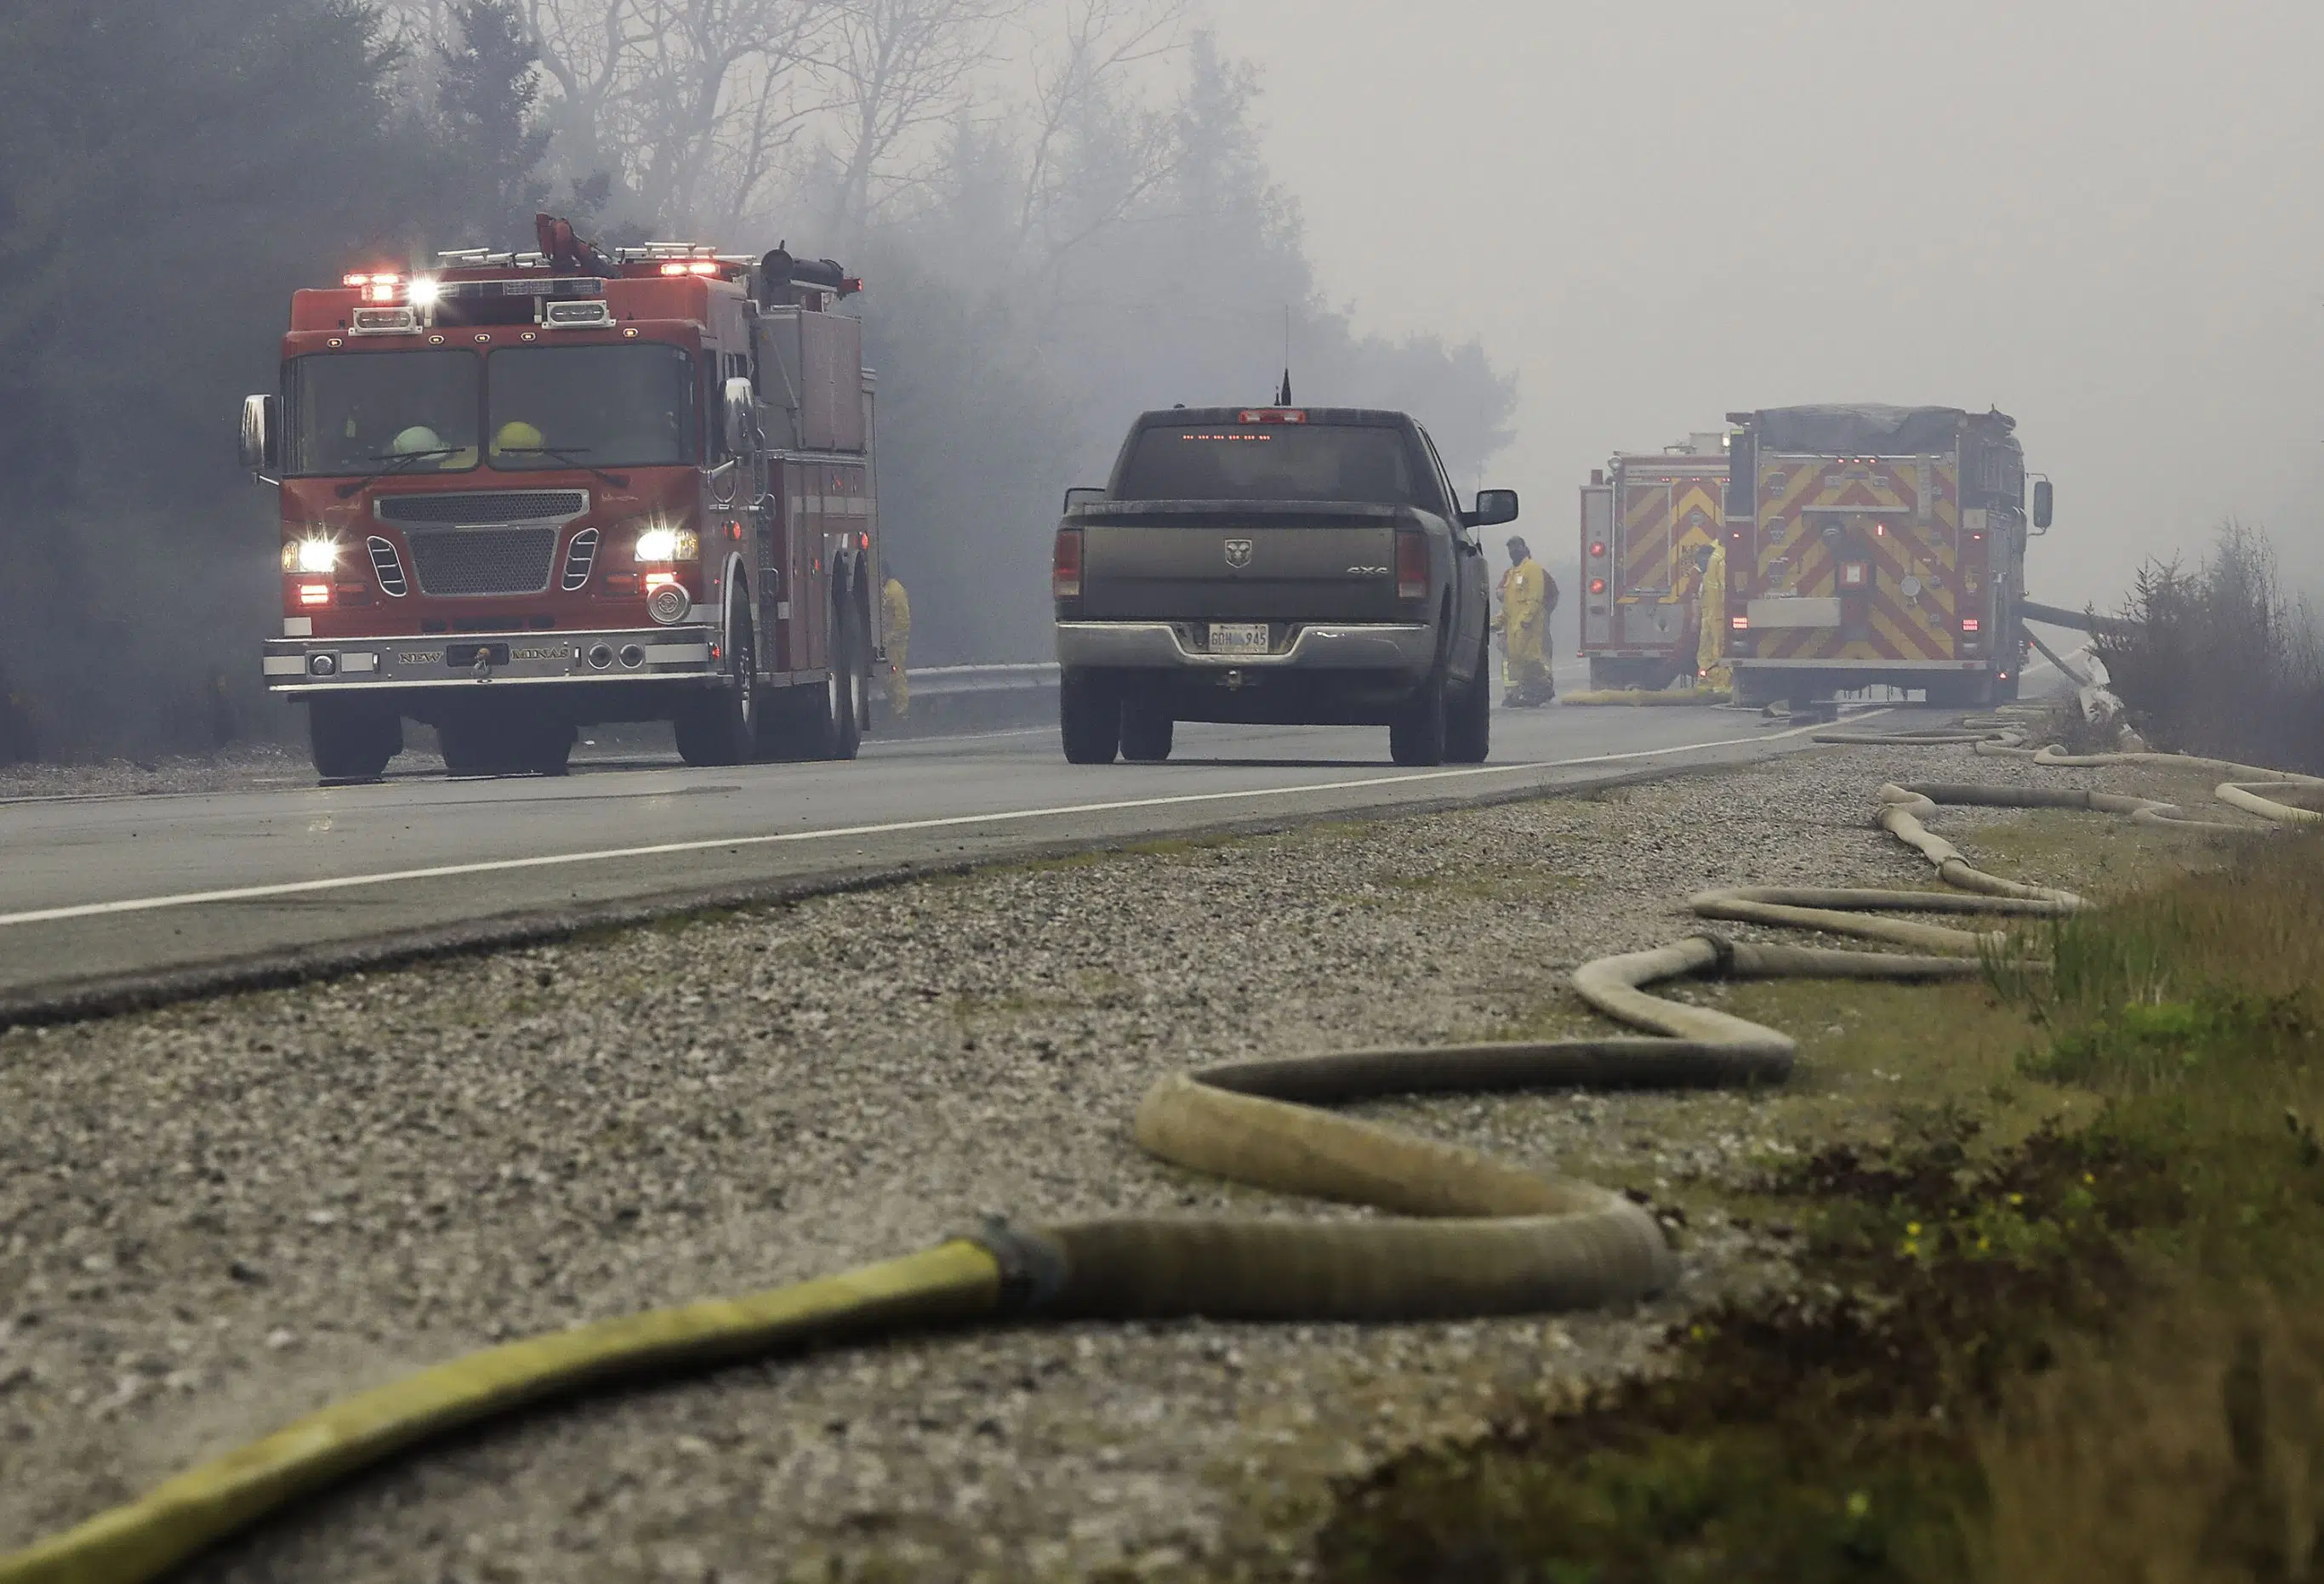 Halifax area fires contained, ban on going in woods will be lifted